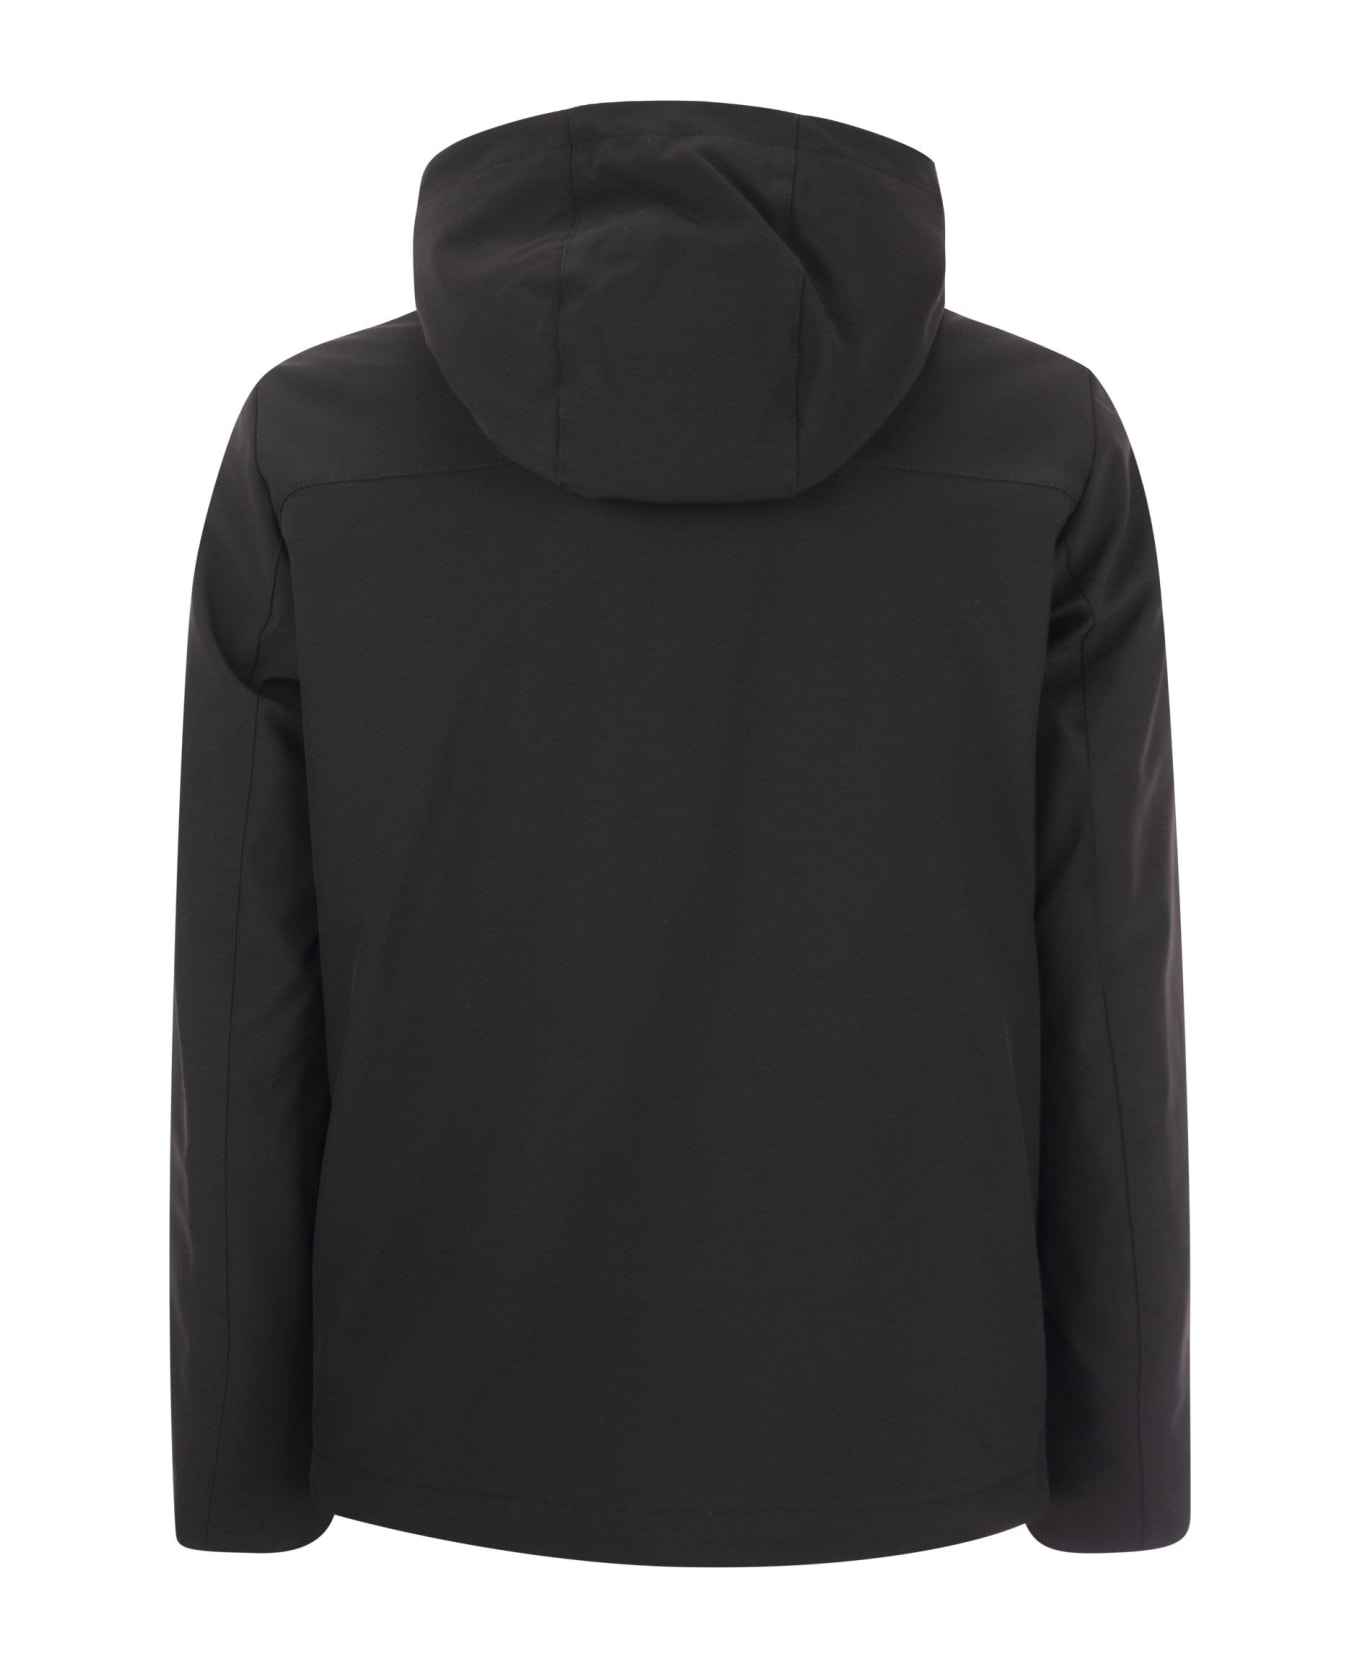 Woolrich Pacific - Softshell Jacket - Black